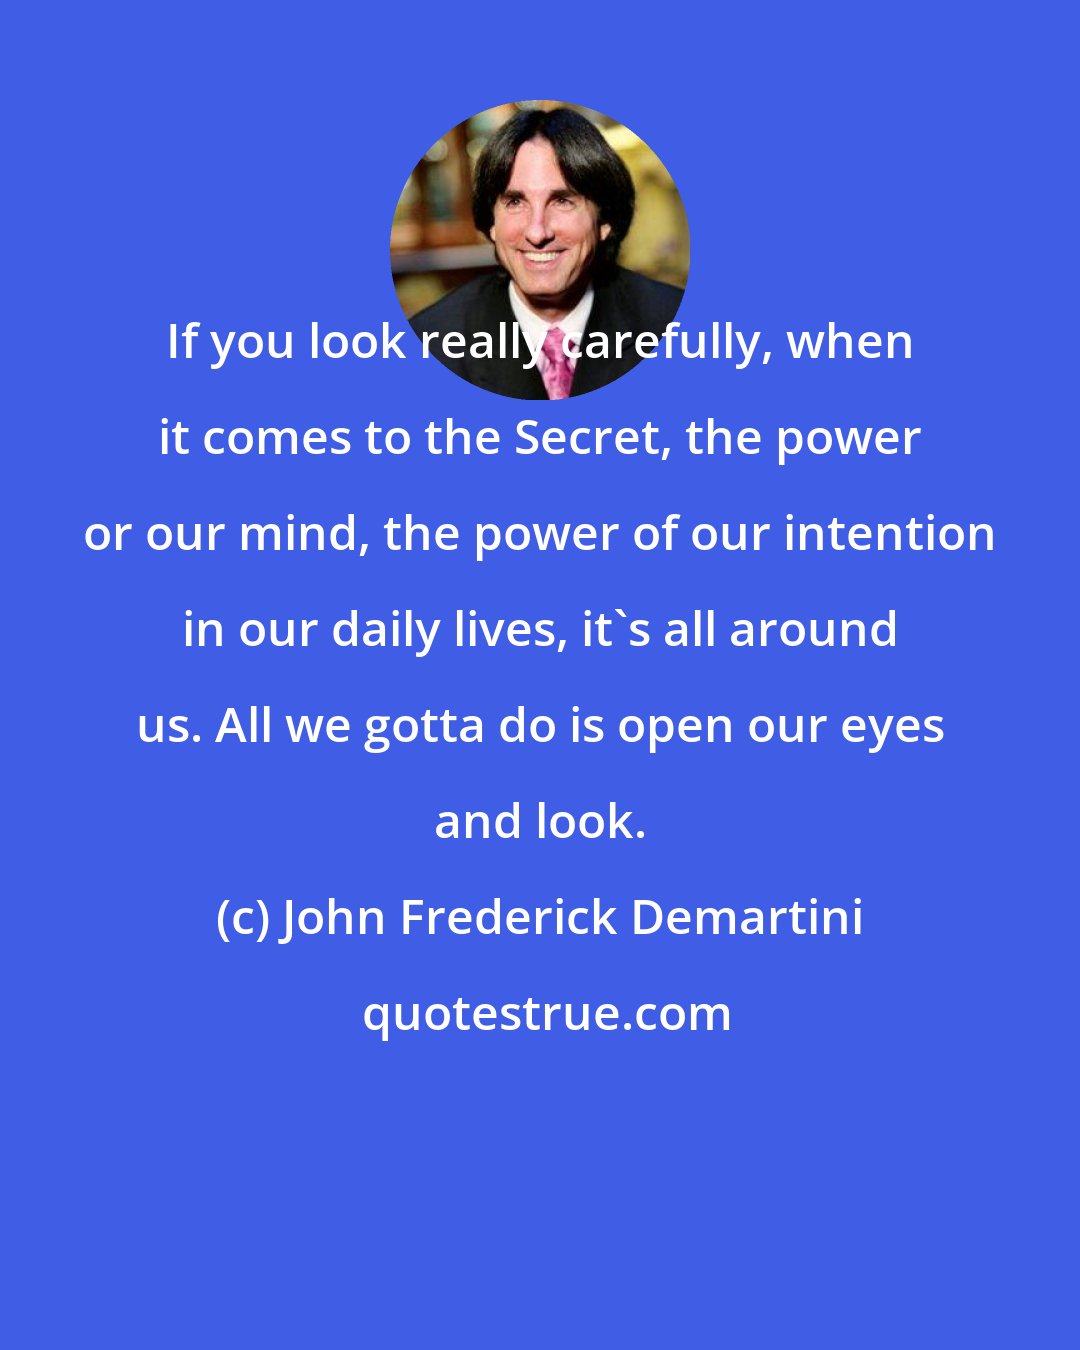 John Frederick Demartini: If you look really carefully, when it comes to the Secret, the power or our mind, the power of our intention in our daily lives, it's all around us. All we gotta do is open our eyes and look.